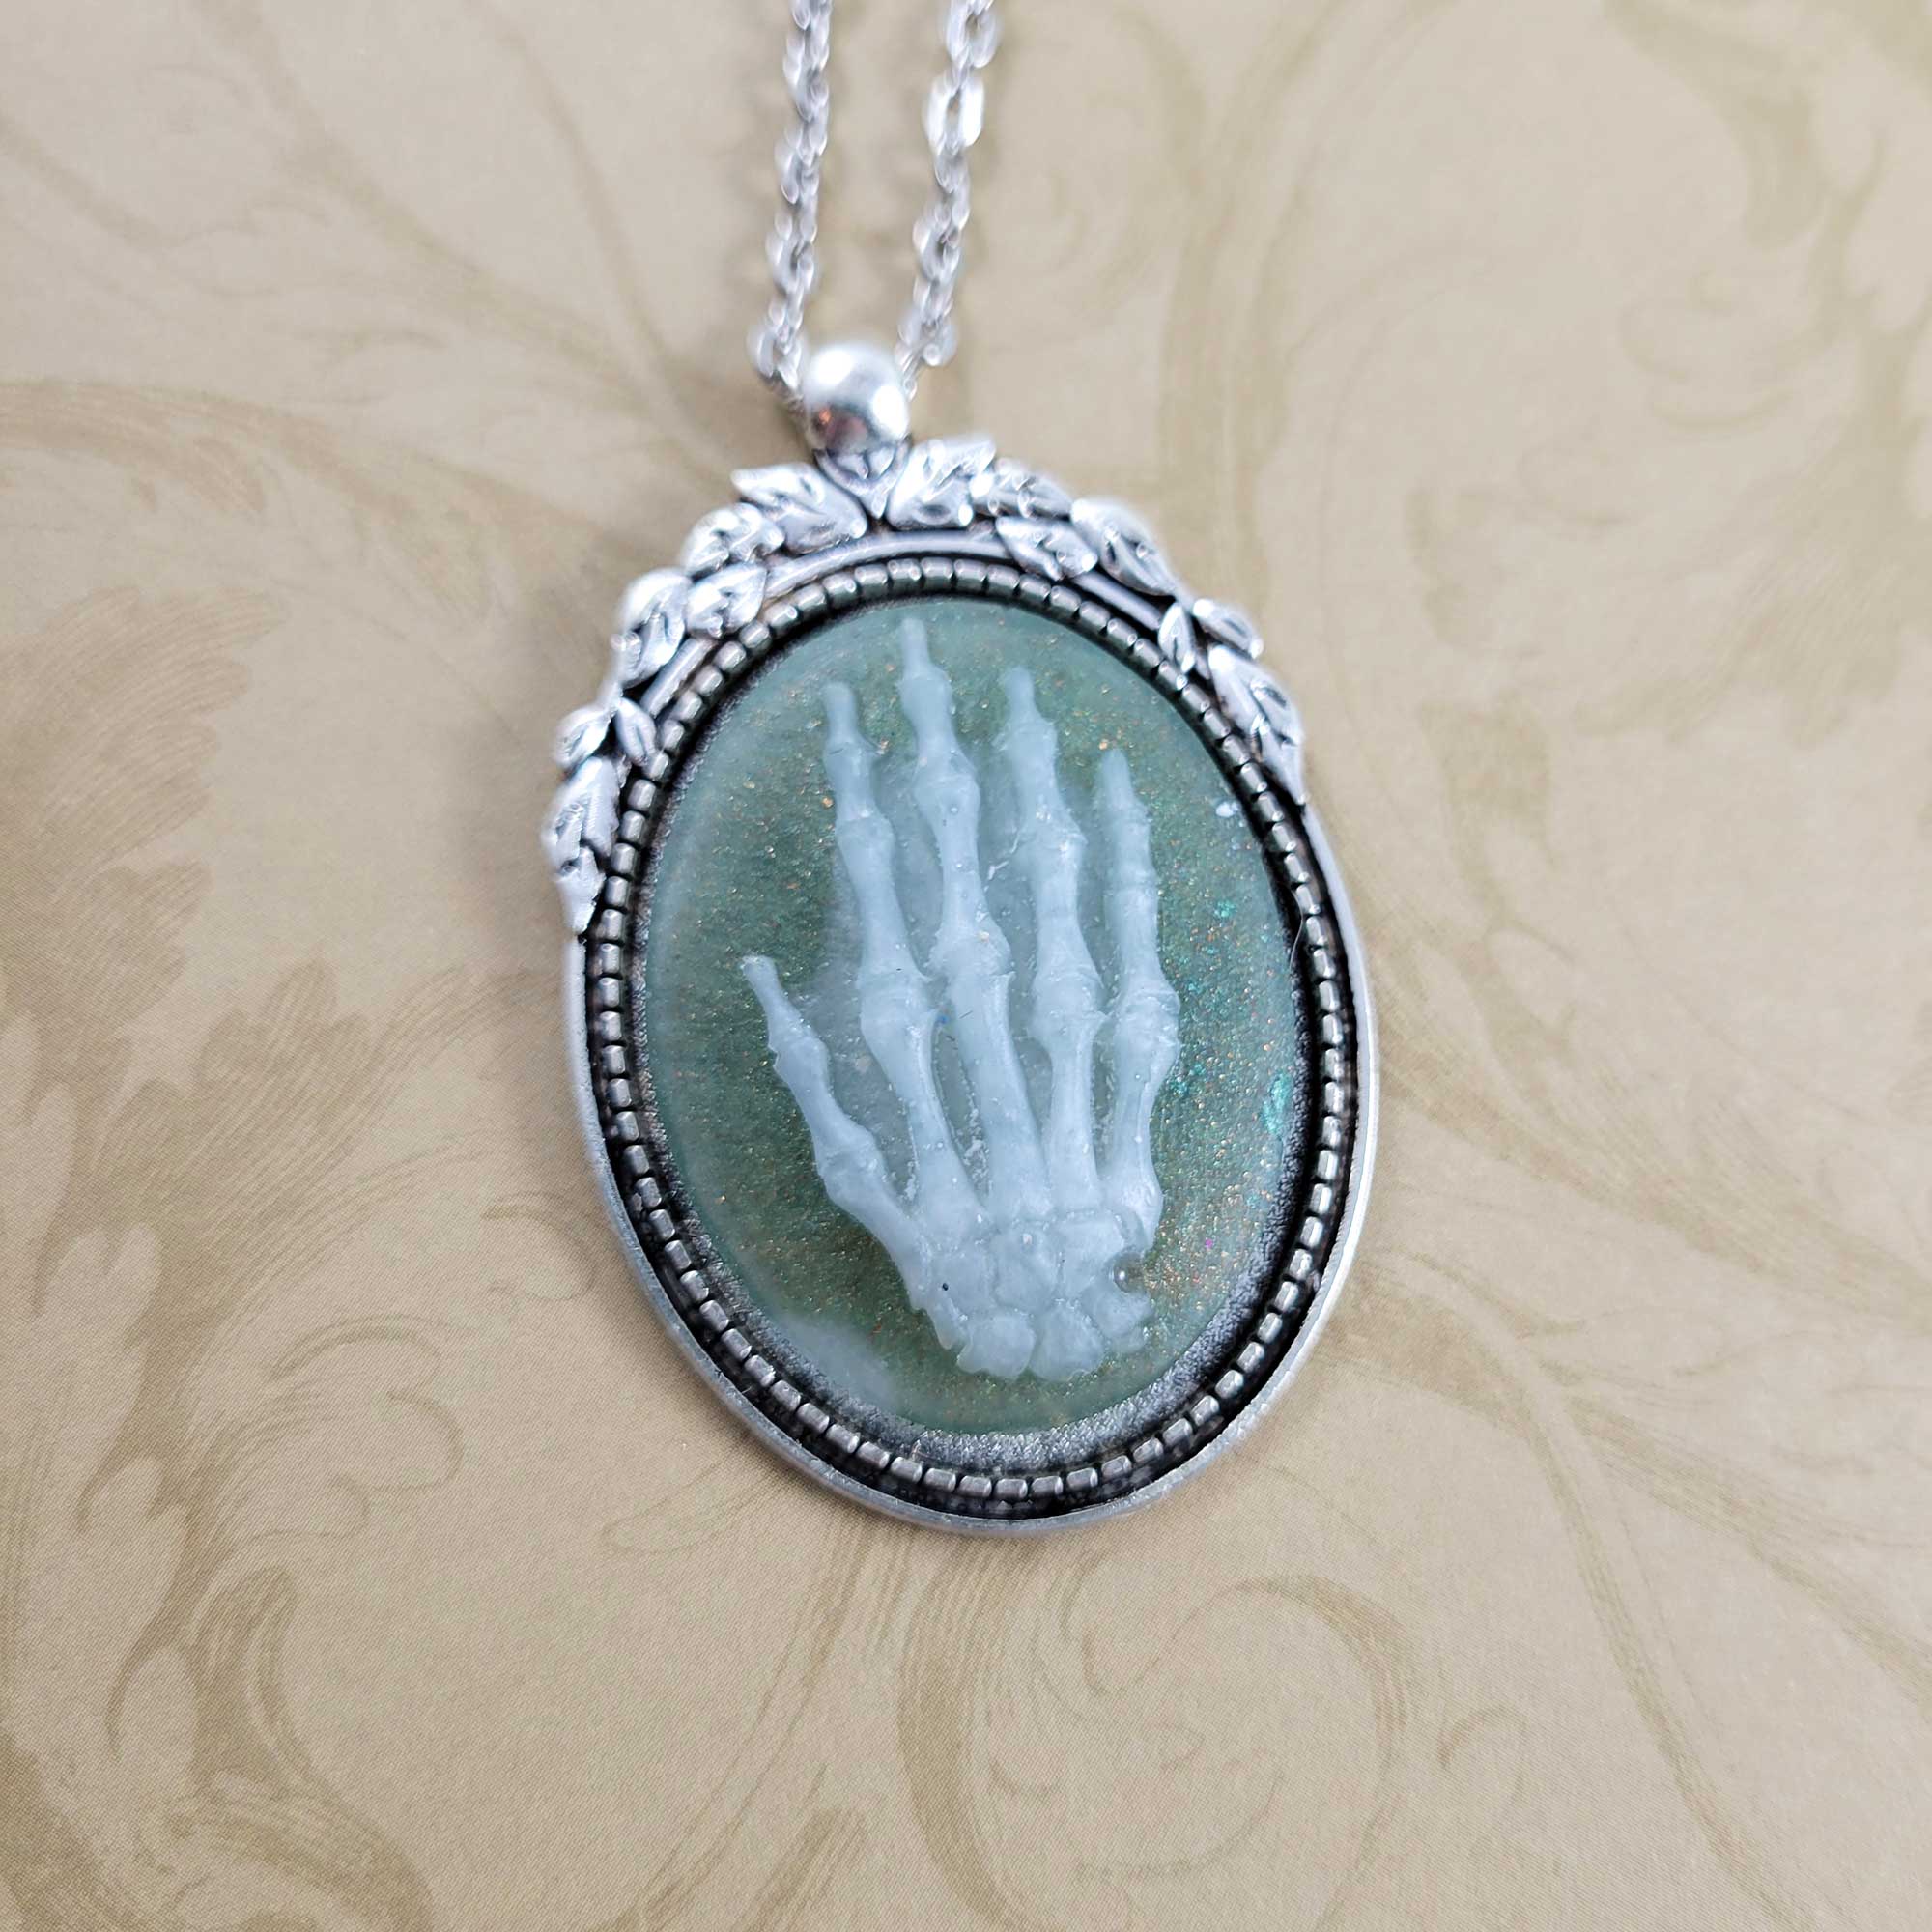 White & Green Hand of Death Necklace by Wilde Designs